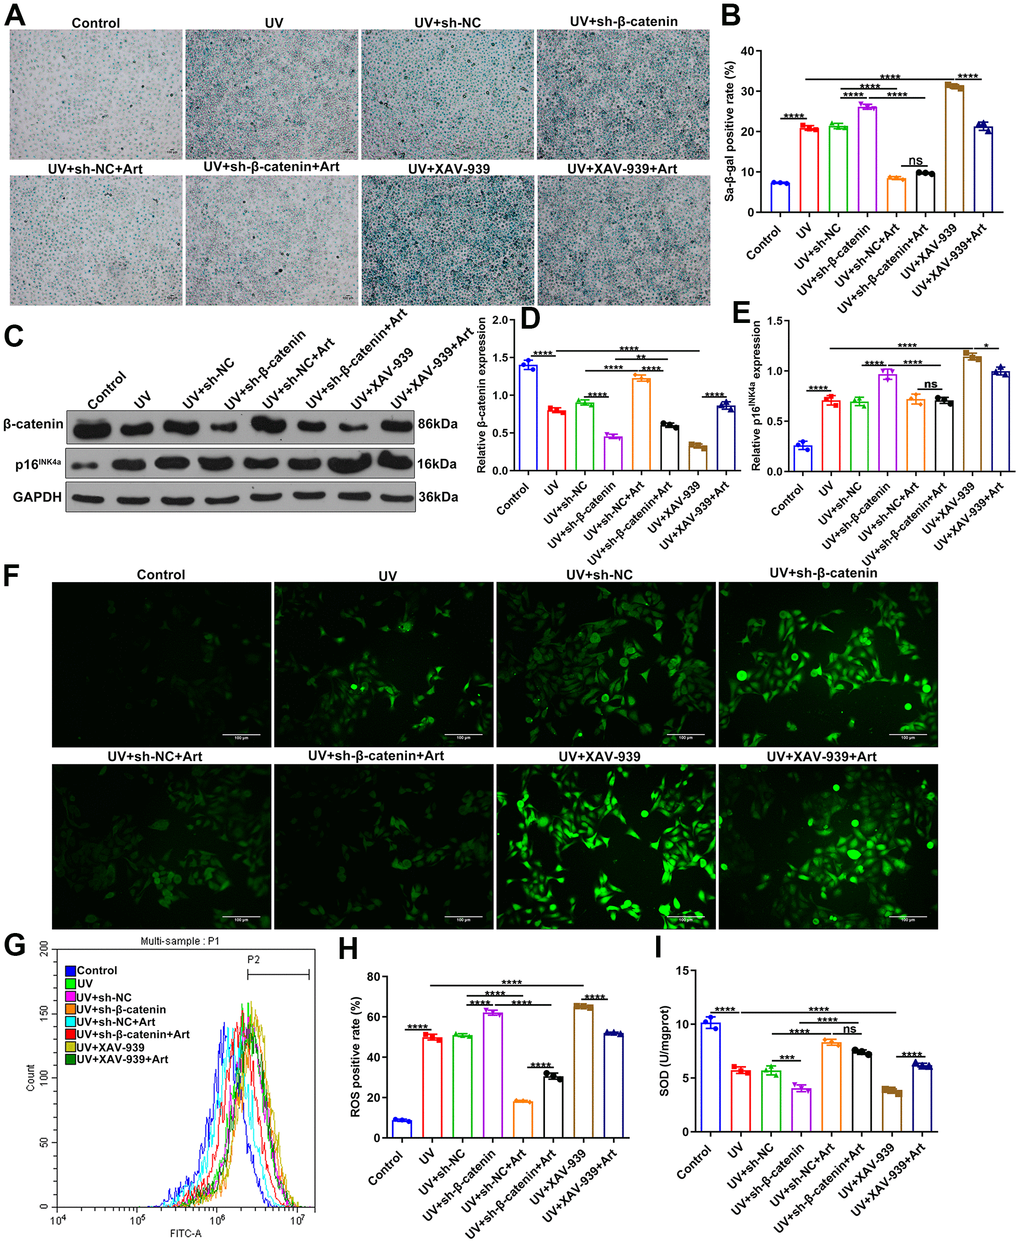 Art treatment inhibits cell senescence, p16INK4a expression and intracellular ROS production and promotes SOD expression in UVB-irradiated HaCaT cells via increasing β-catenin expression. (A, B) SA-β-gal staining for cell senescence in control group, UV group, UV + sh-NC group, UV + sh-β-catenin group, UV + sh-NC + Art group, UV + sh-β-catenin + Art group, UV + XAV-939 group and UV + XAV-939 + Art group. Scale bar: 100 μm. Magnification: 200×. (C–E) Western blot of the expression of β-catenin and p16INK4a in HaCaT cells from each group. (F) Immunofluorescence and (G, H) Flow cytometry of intracellular ROS expression in HaCaT cells from each group. Scale bar: 100 μm. Magnification: 200×. (I) Detection of SOD levels in HaCaT cells from each group. Ns: not significant; *p